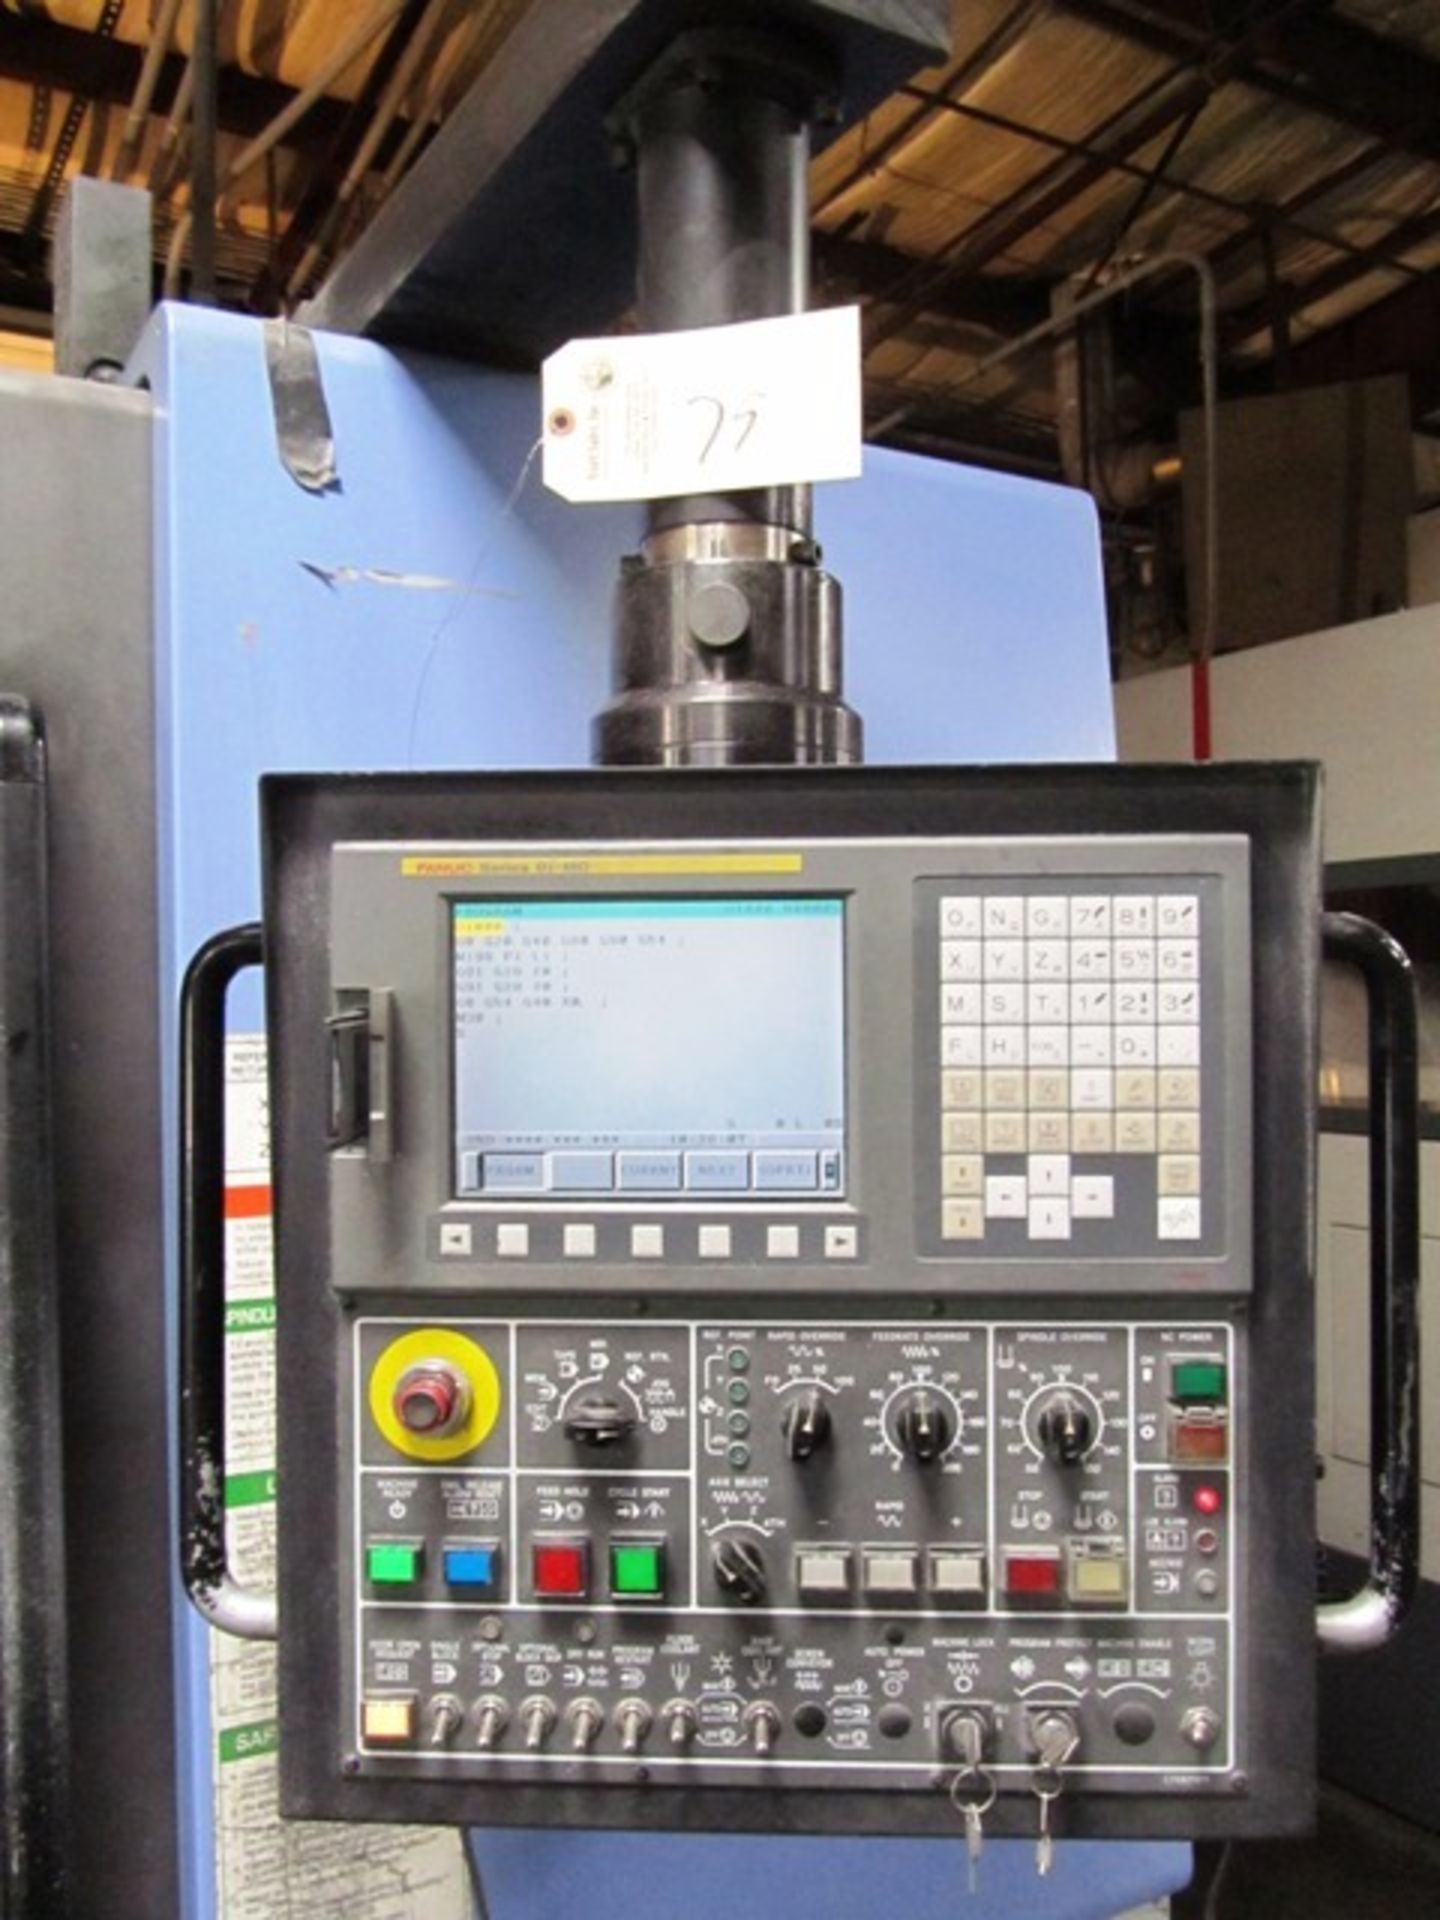 Doosan MV 4020L CNC Vertical Machining Center with 48'' x 20'' Worktable, #40 Taper Spindle Speeds - Image 2 of 5